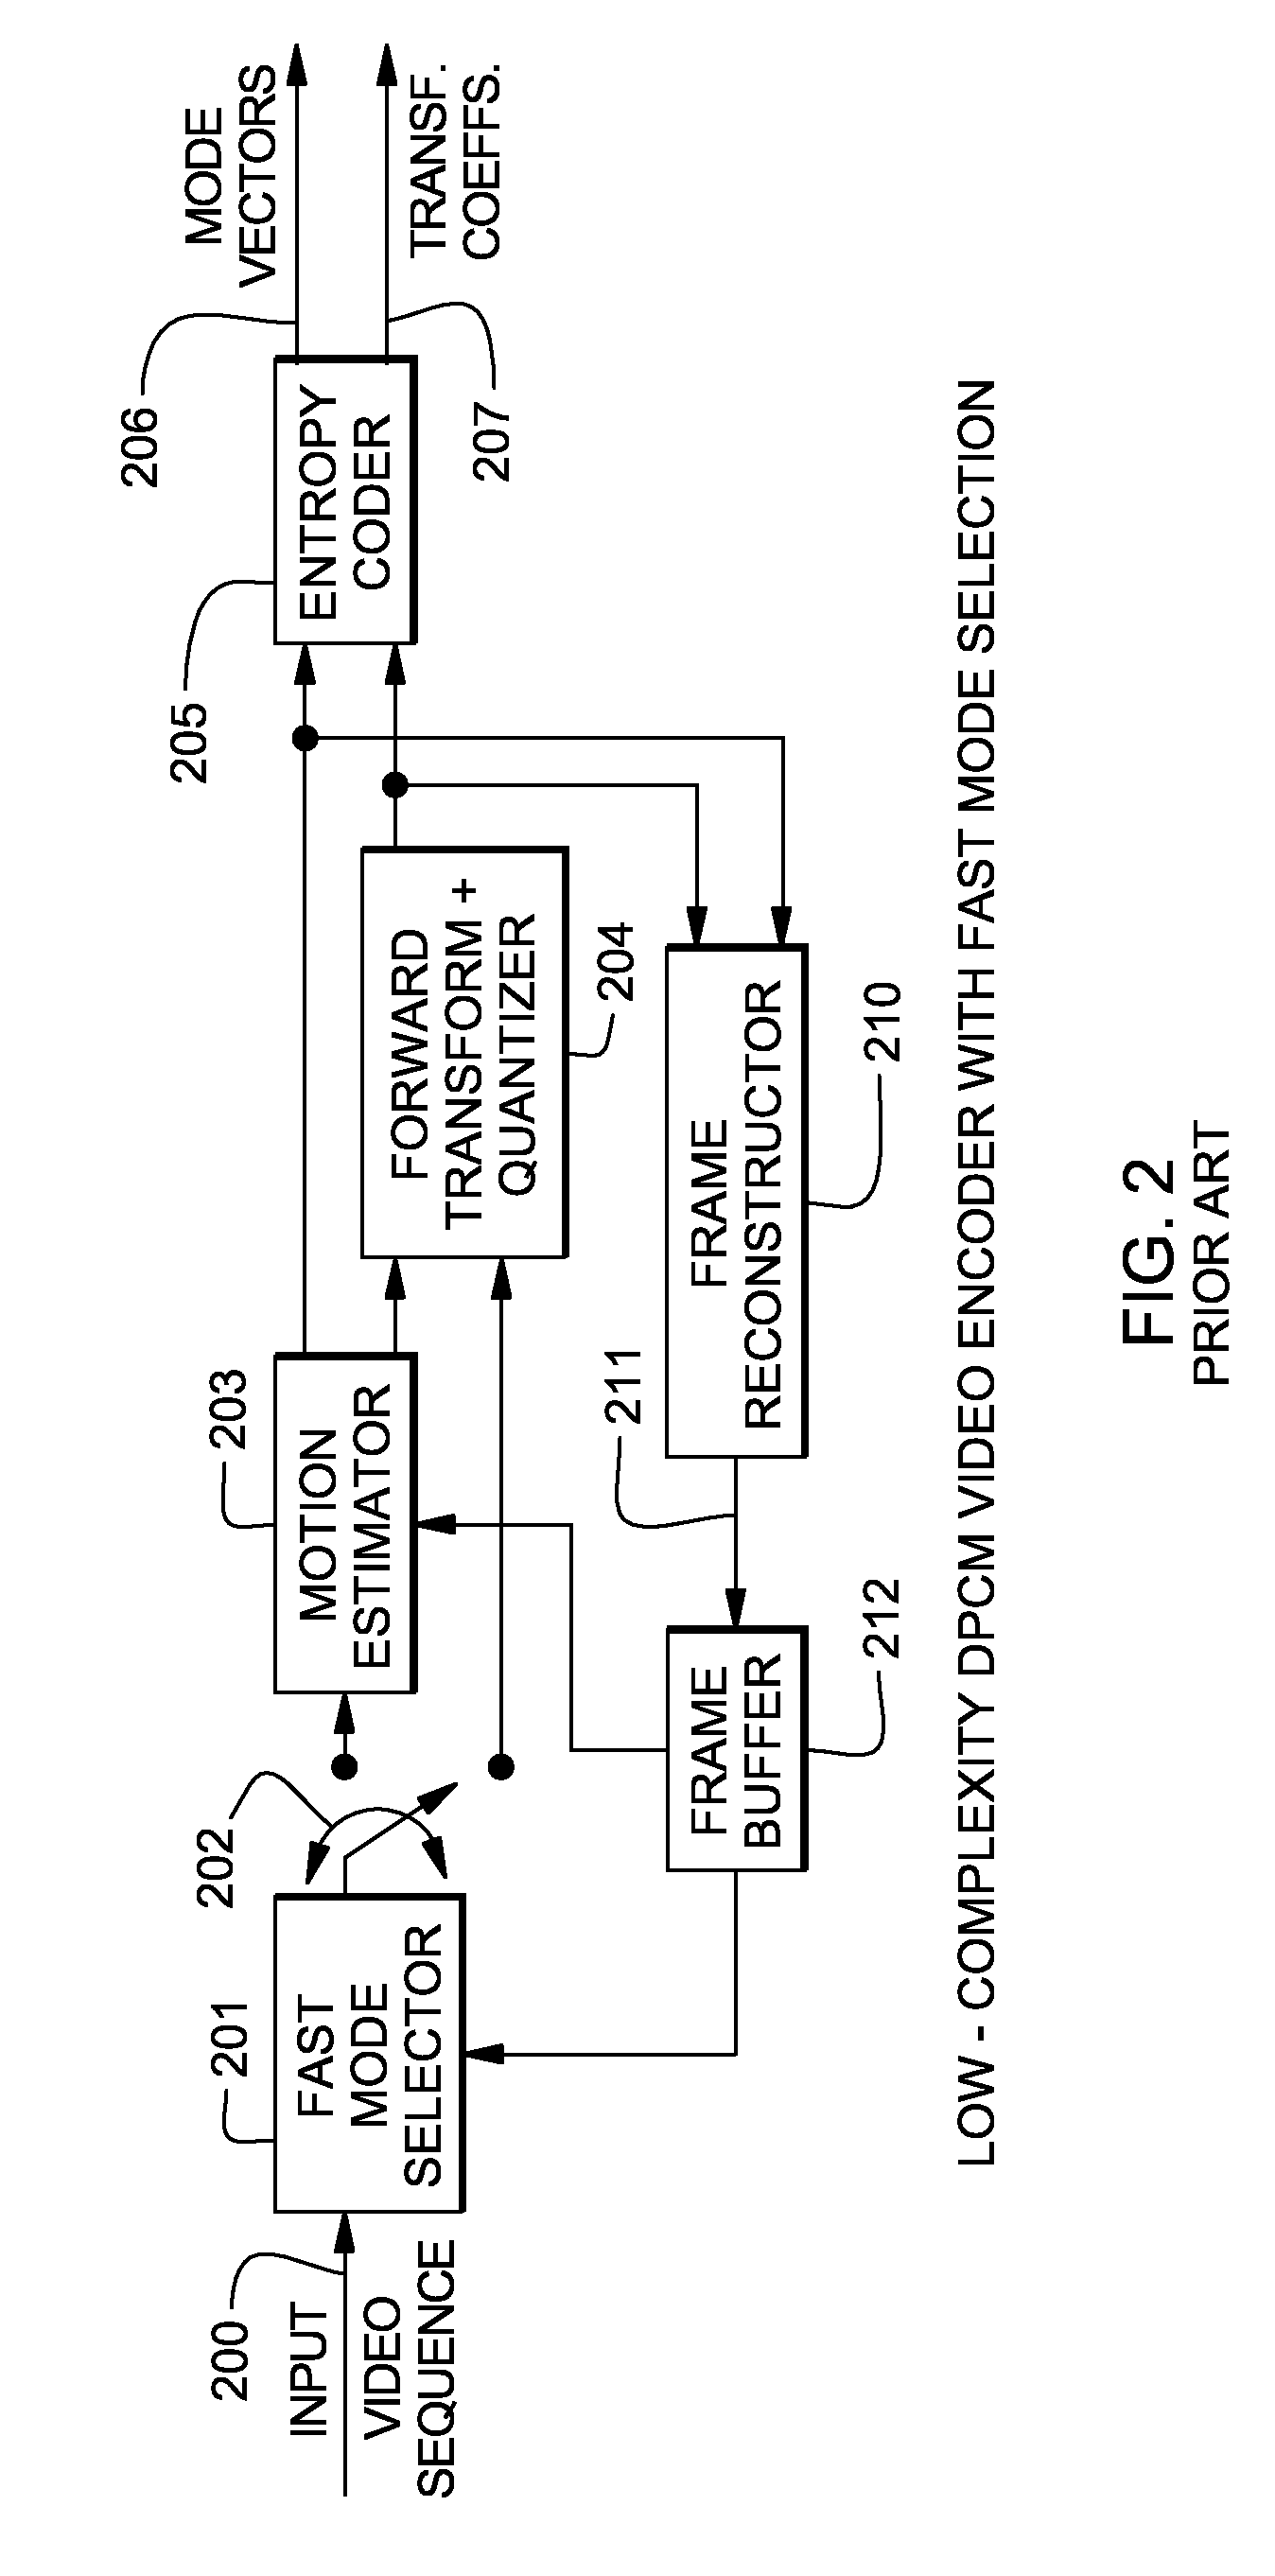 Method and system for efficient video compression with low-complexity encoder